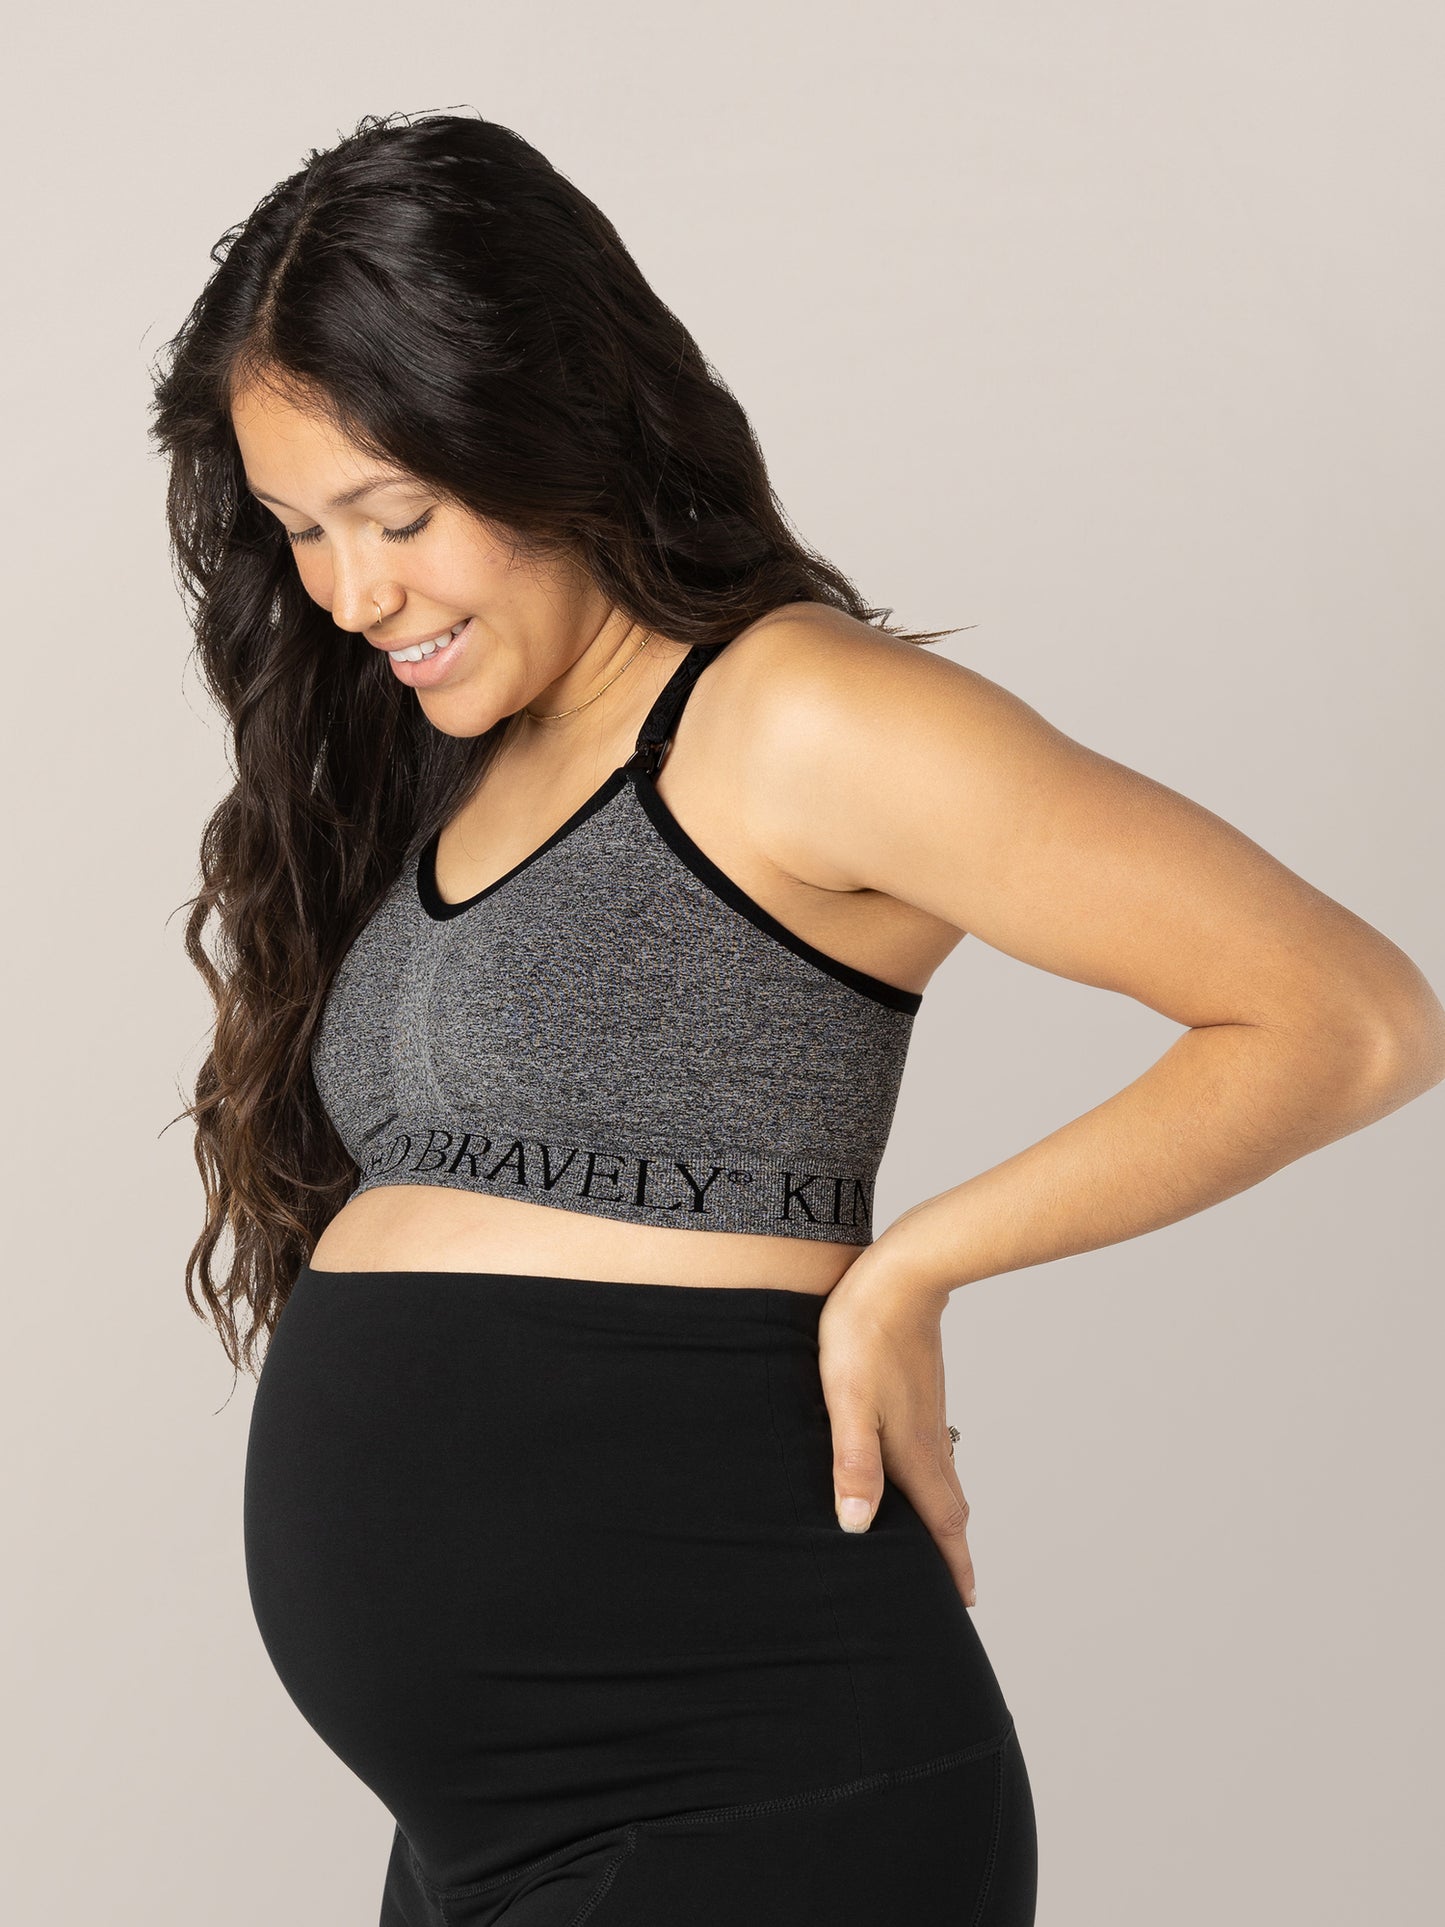 Pregnant model looking down at her baby bump while wearing the Sublime® Nursing Sports Bra in Heather Grey.